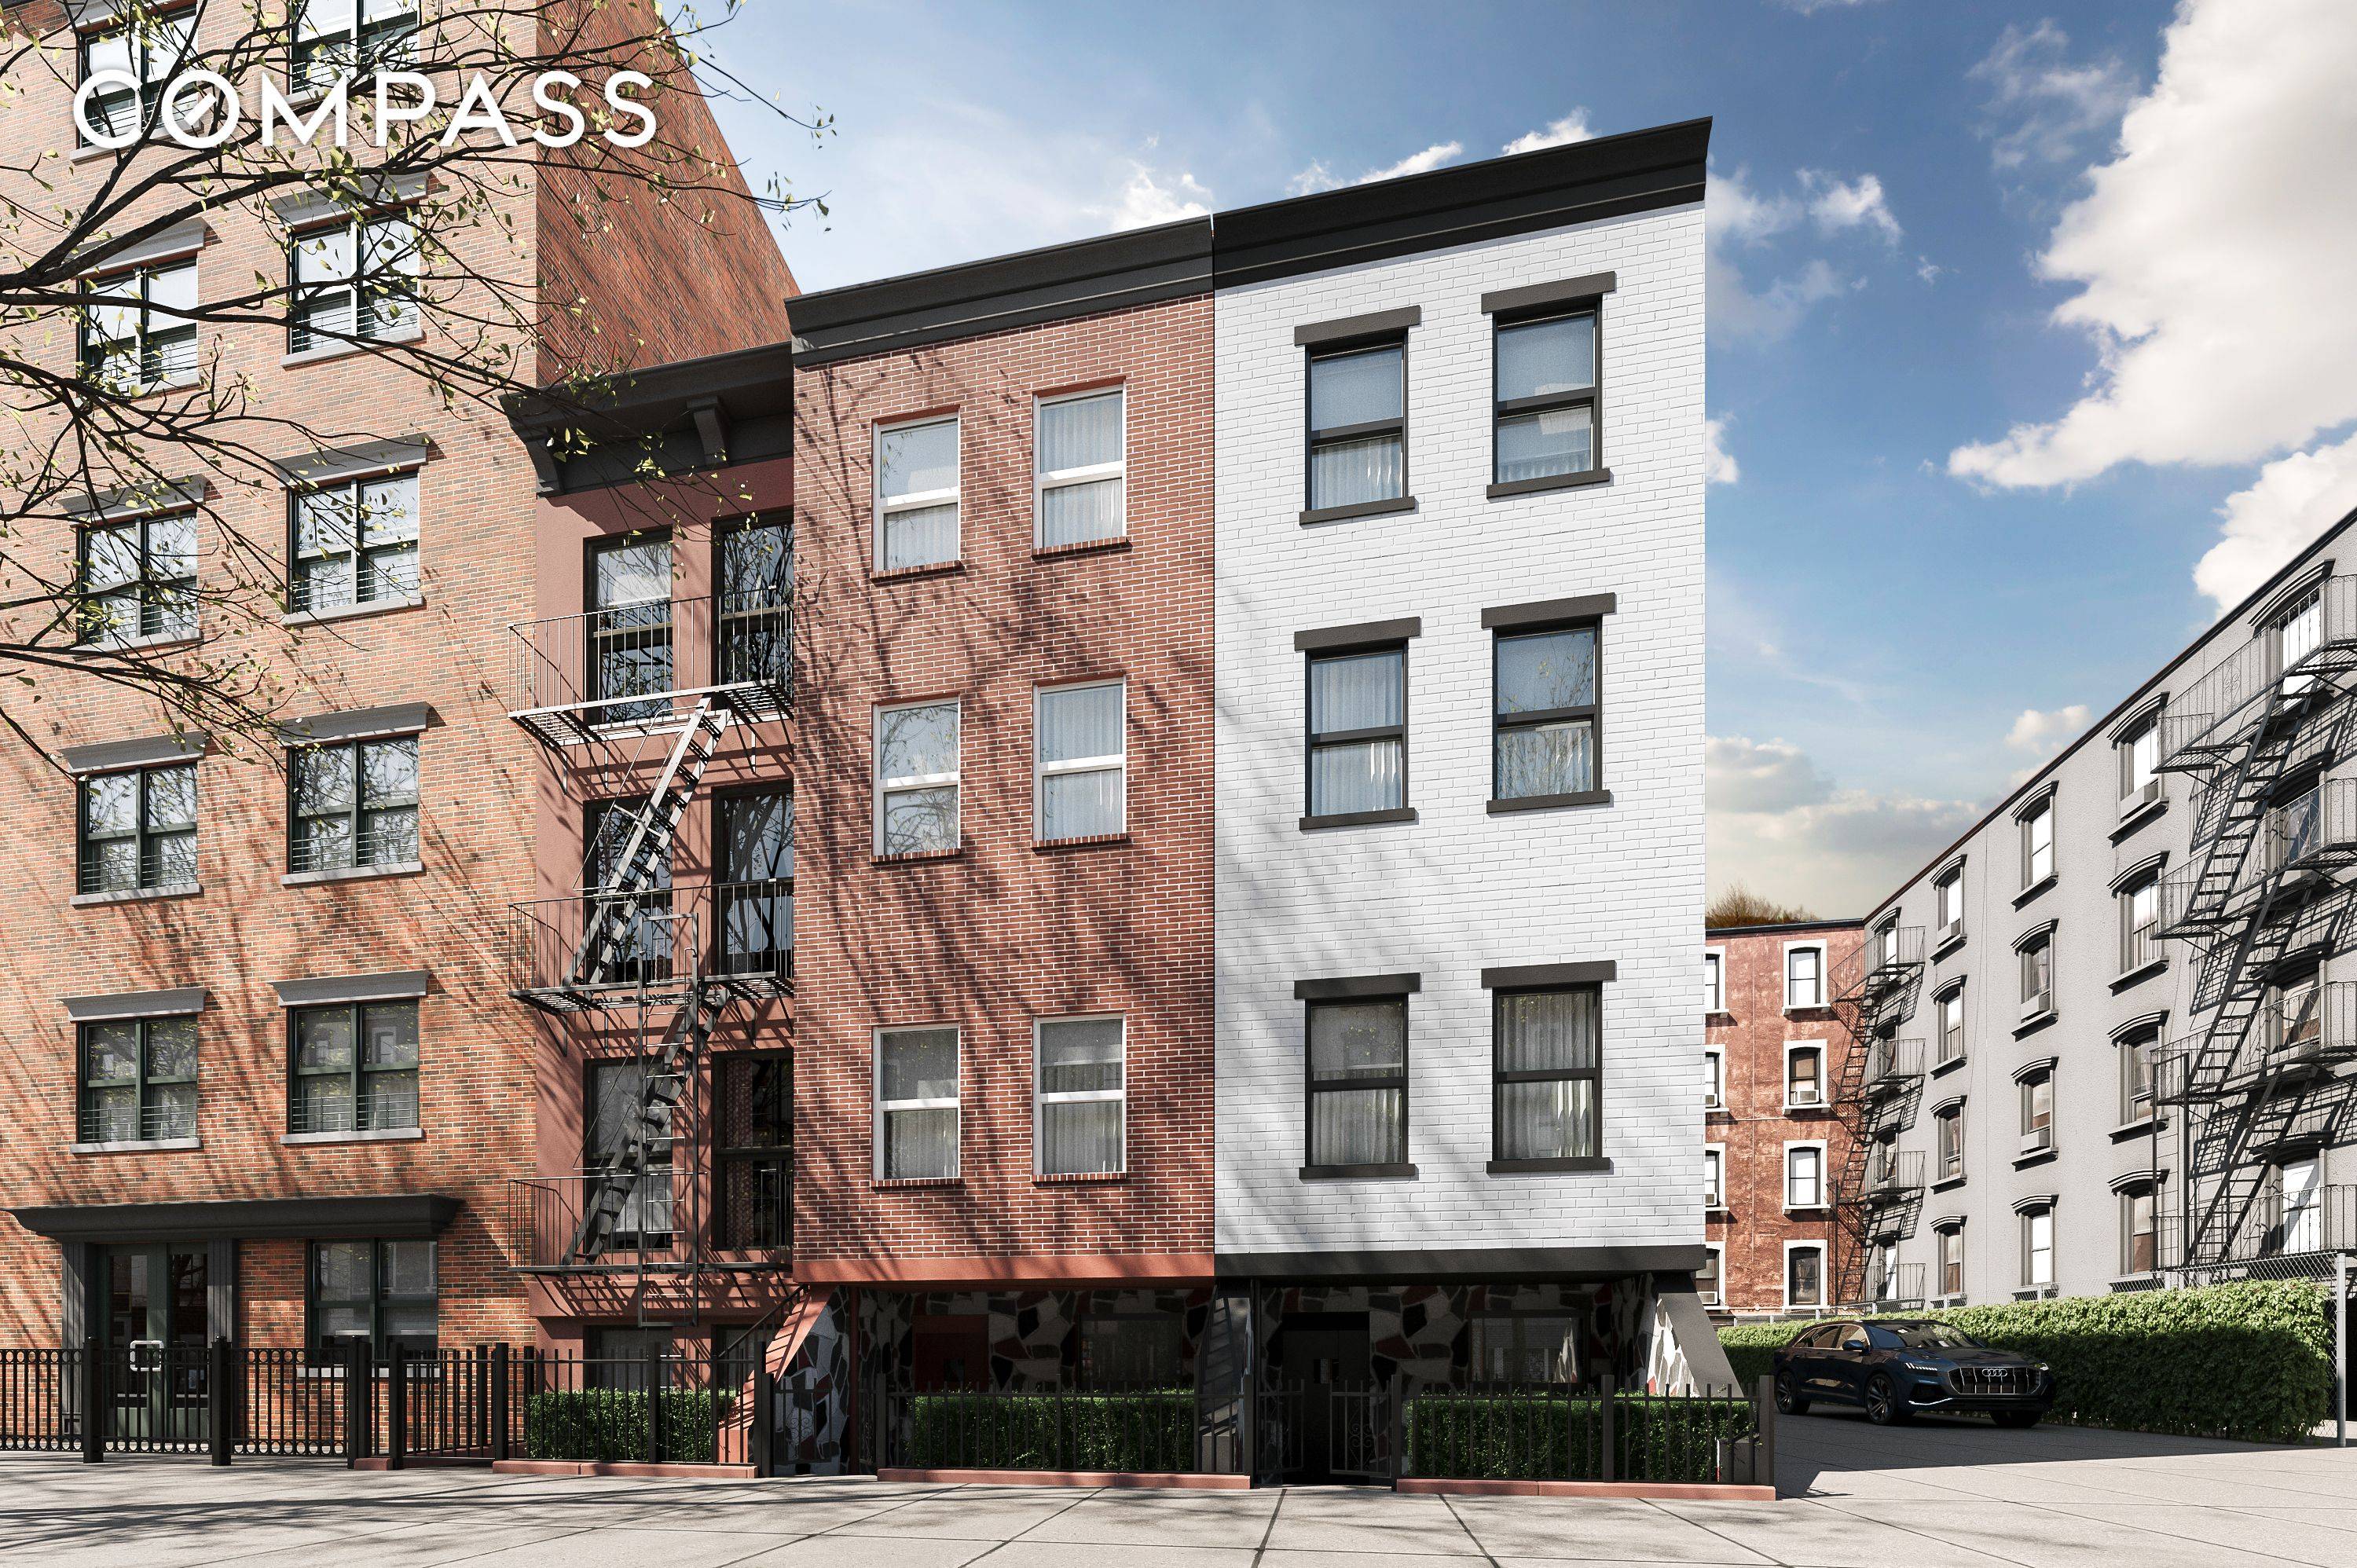 Introducing a distinguished income generating property at 273 Pleasant Ave, nestled in the vibrant neighborhood of East Harlem.